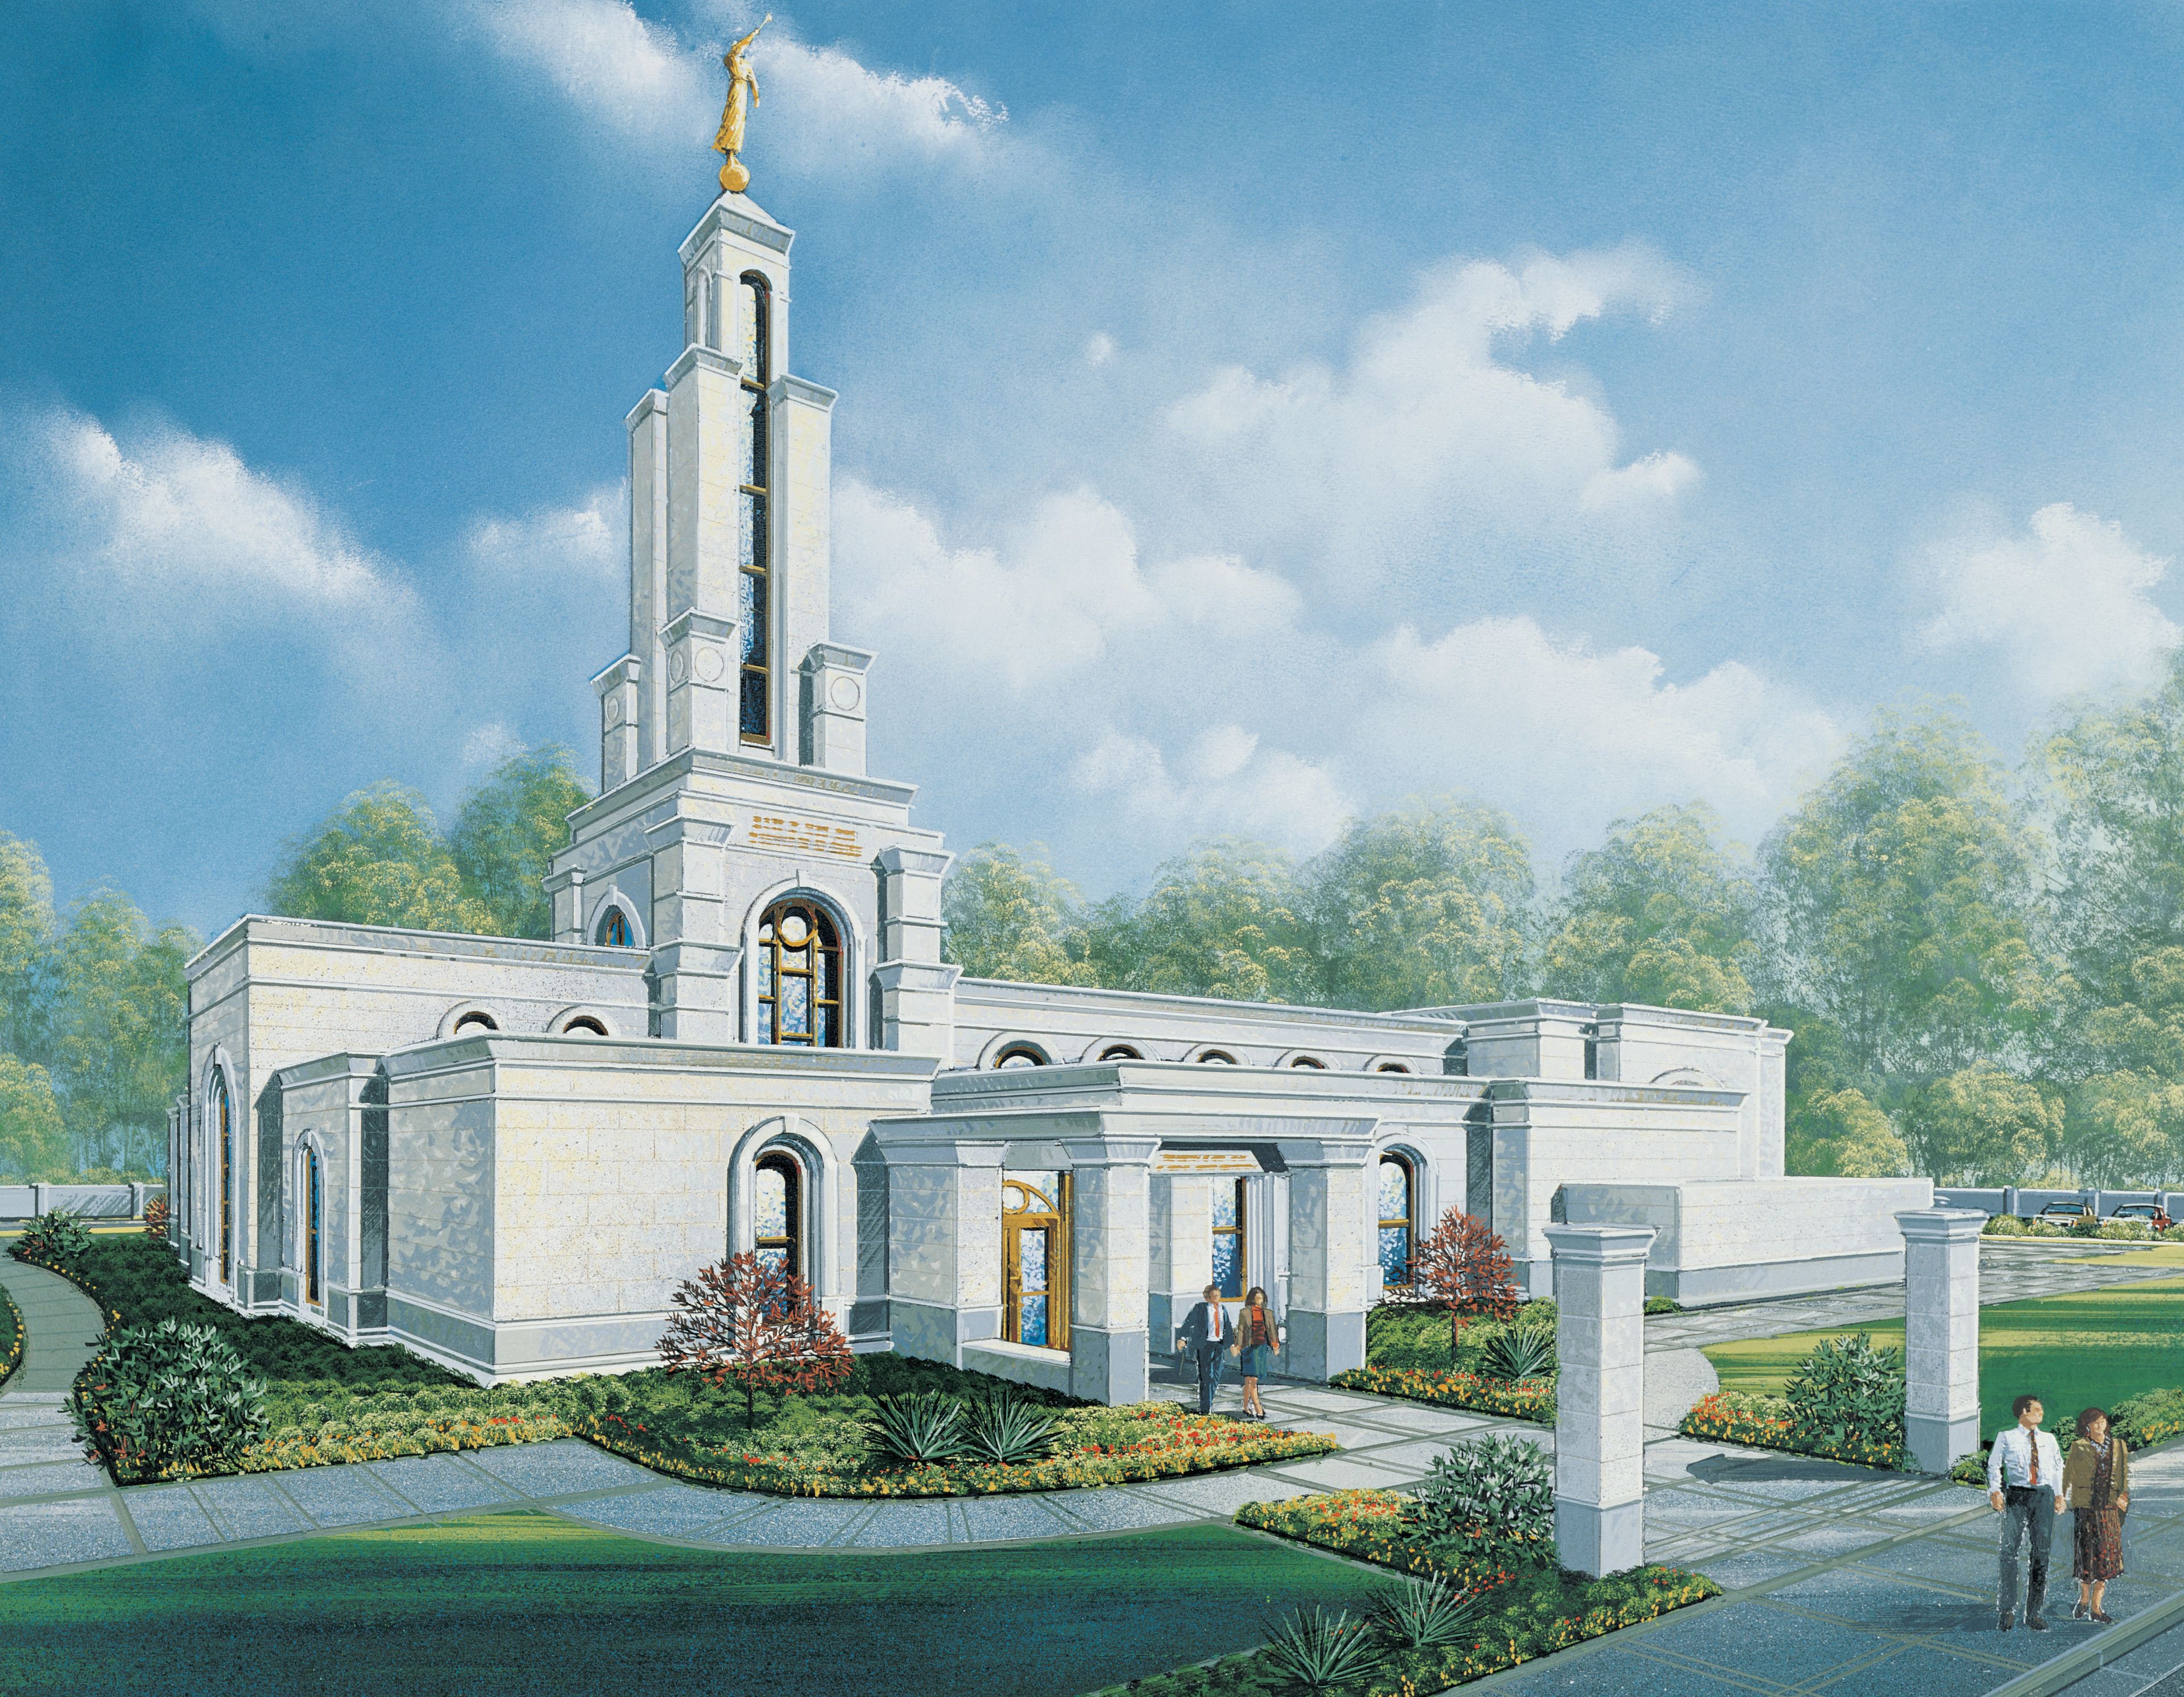 An artist’s rendition of the Lubbock Texas Temple, including the entrance and scenery.